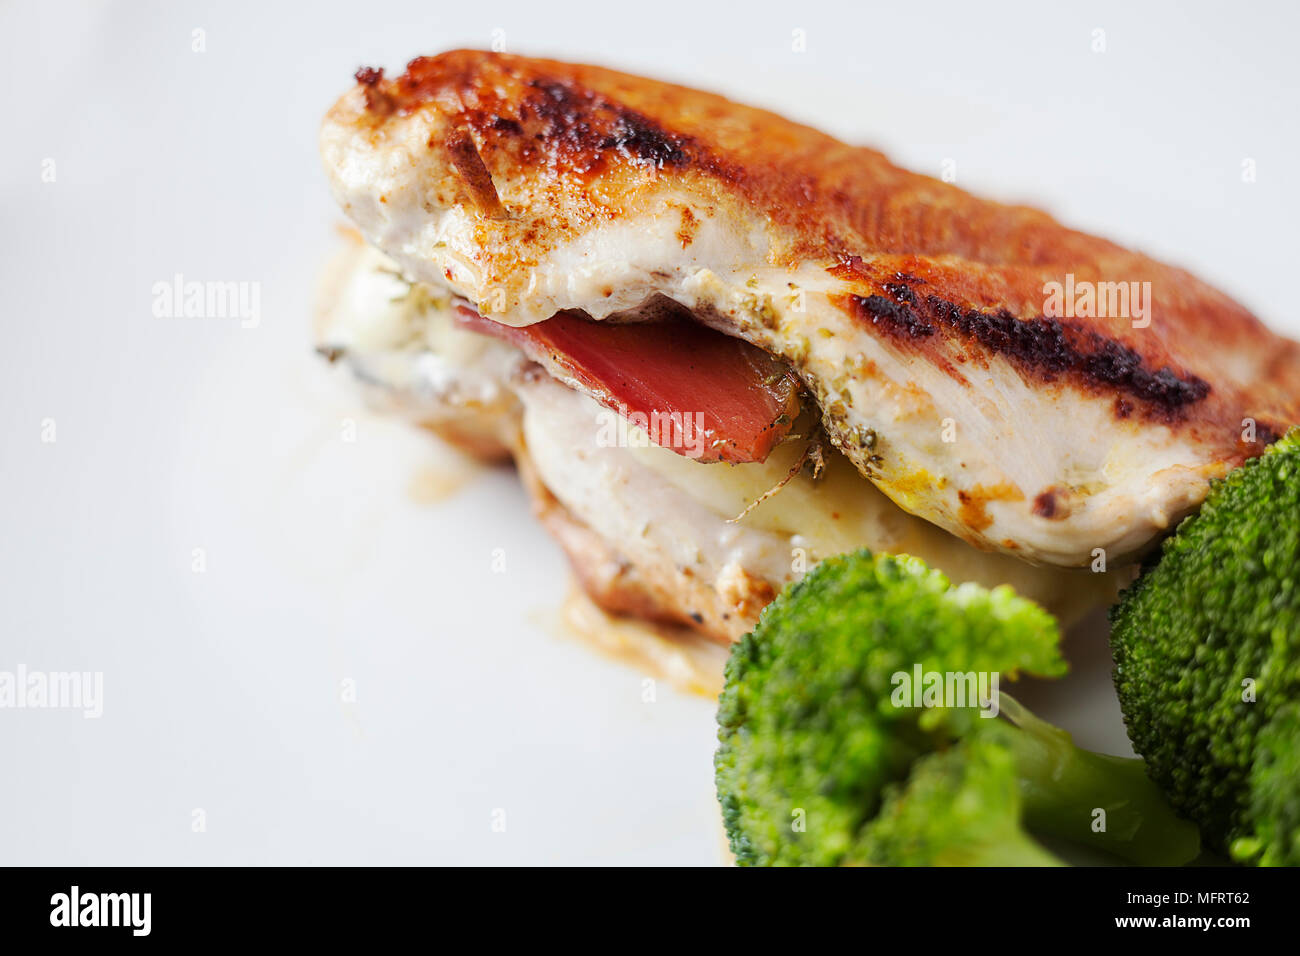 Fried chicken breast stuffed with mozzarella and Serbian ham, adding species such as oregano, smoked paprika, turmeric and pepper. Stock Photo